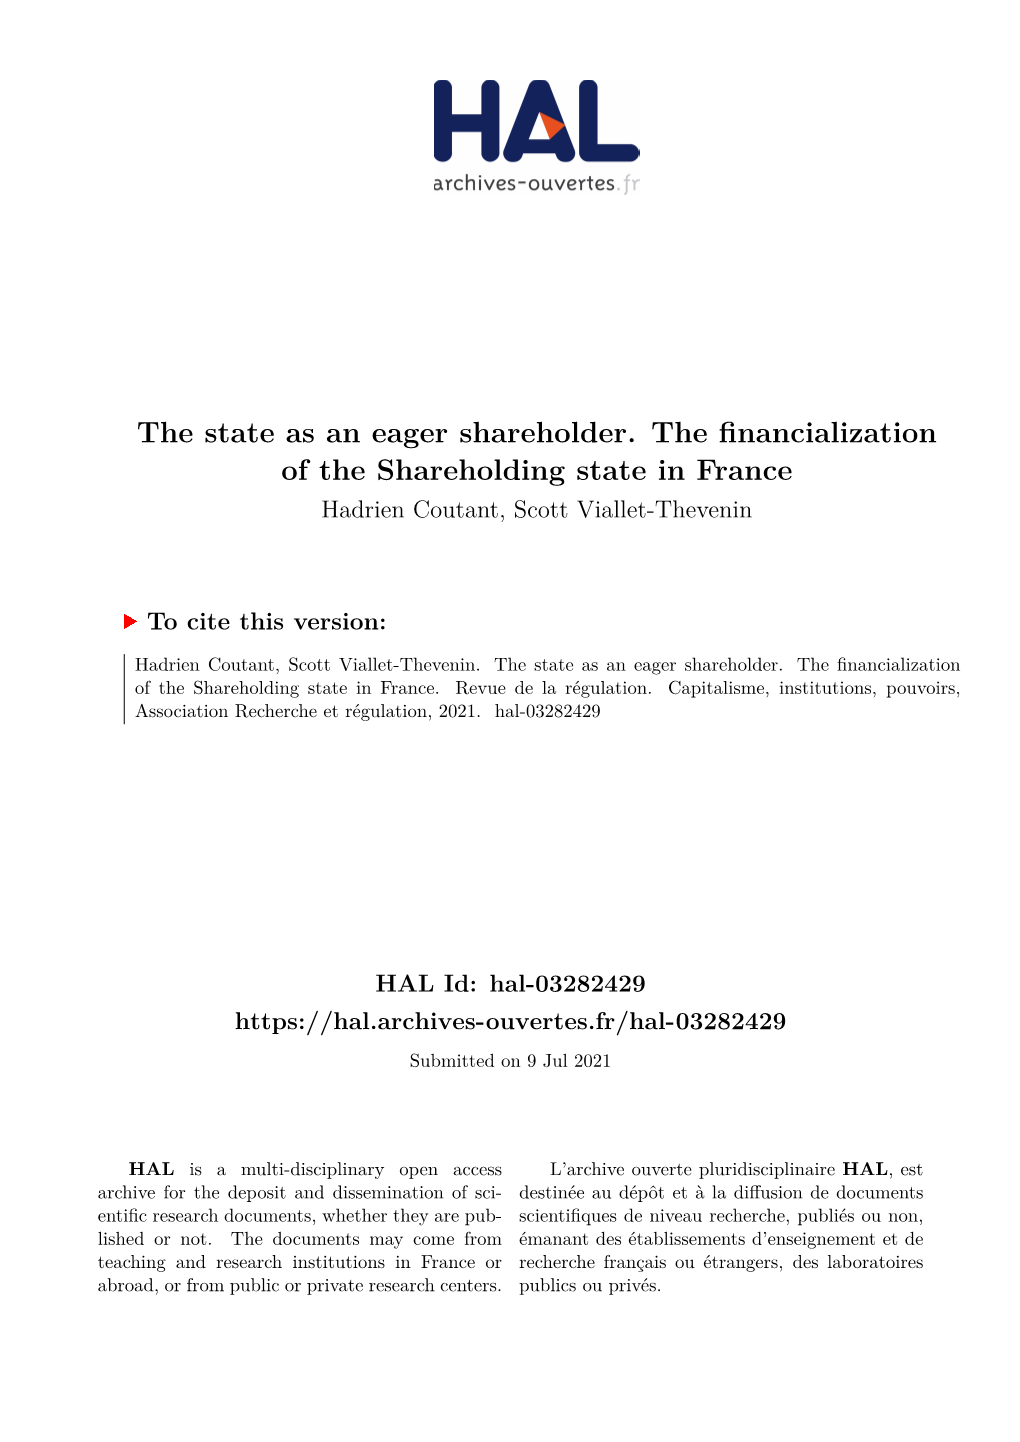 The State As an Eager Shareholder. the Financialization of the Shareholding State in France Hadrien Coutant, Scott Viallet-Thevenin